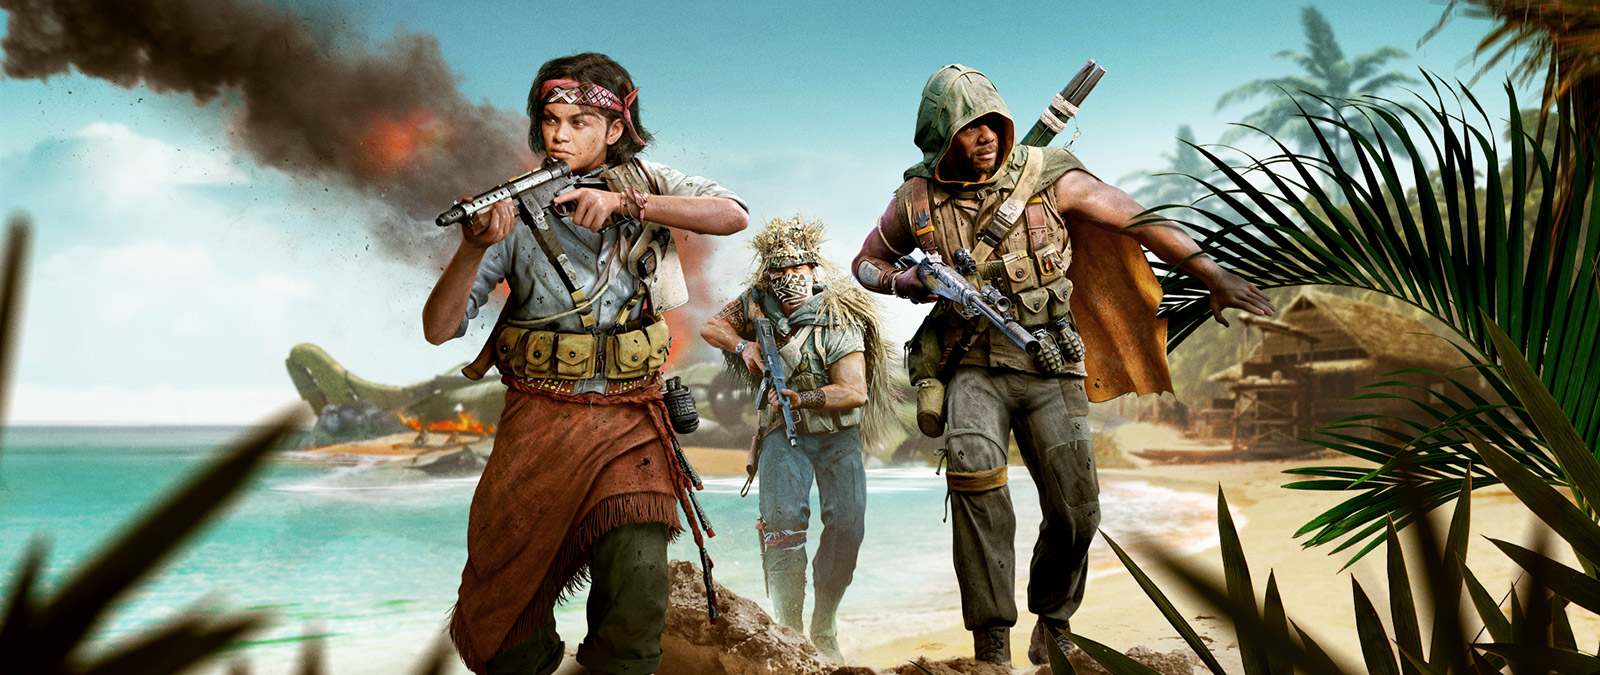 Three characters on a beach shore with weapons and a crashed plane